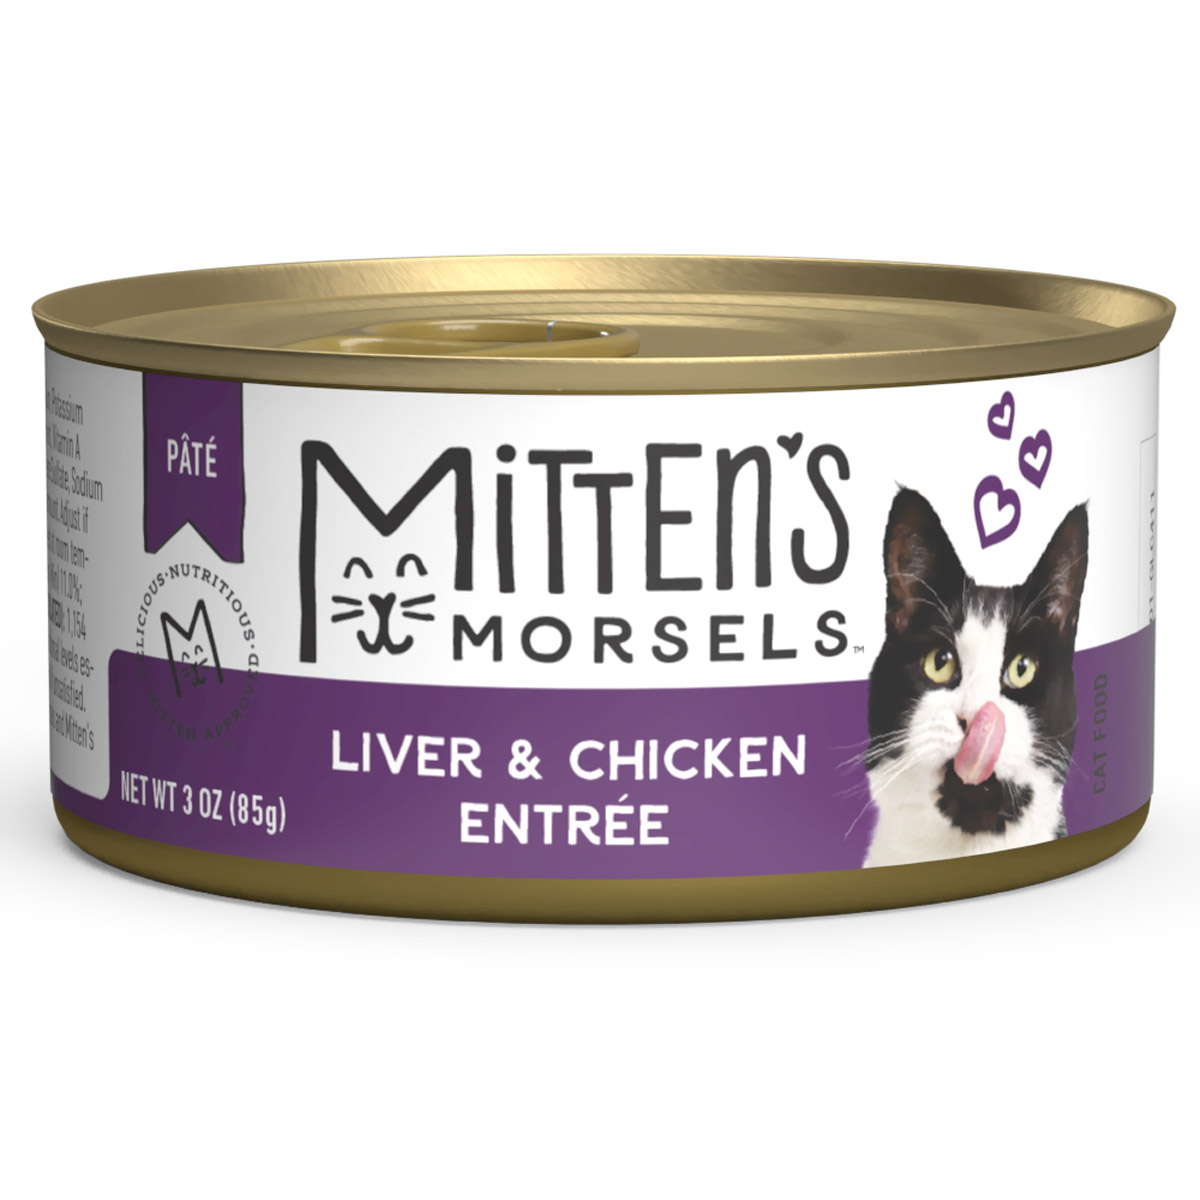 Mittens Morsels Wet Cat Food Pate Liver/chicken 3oz